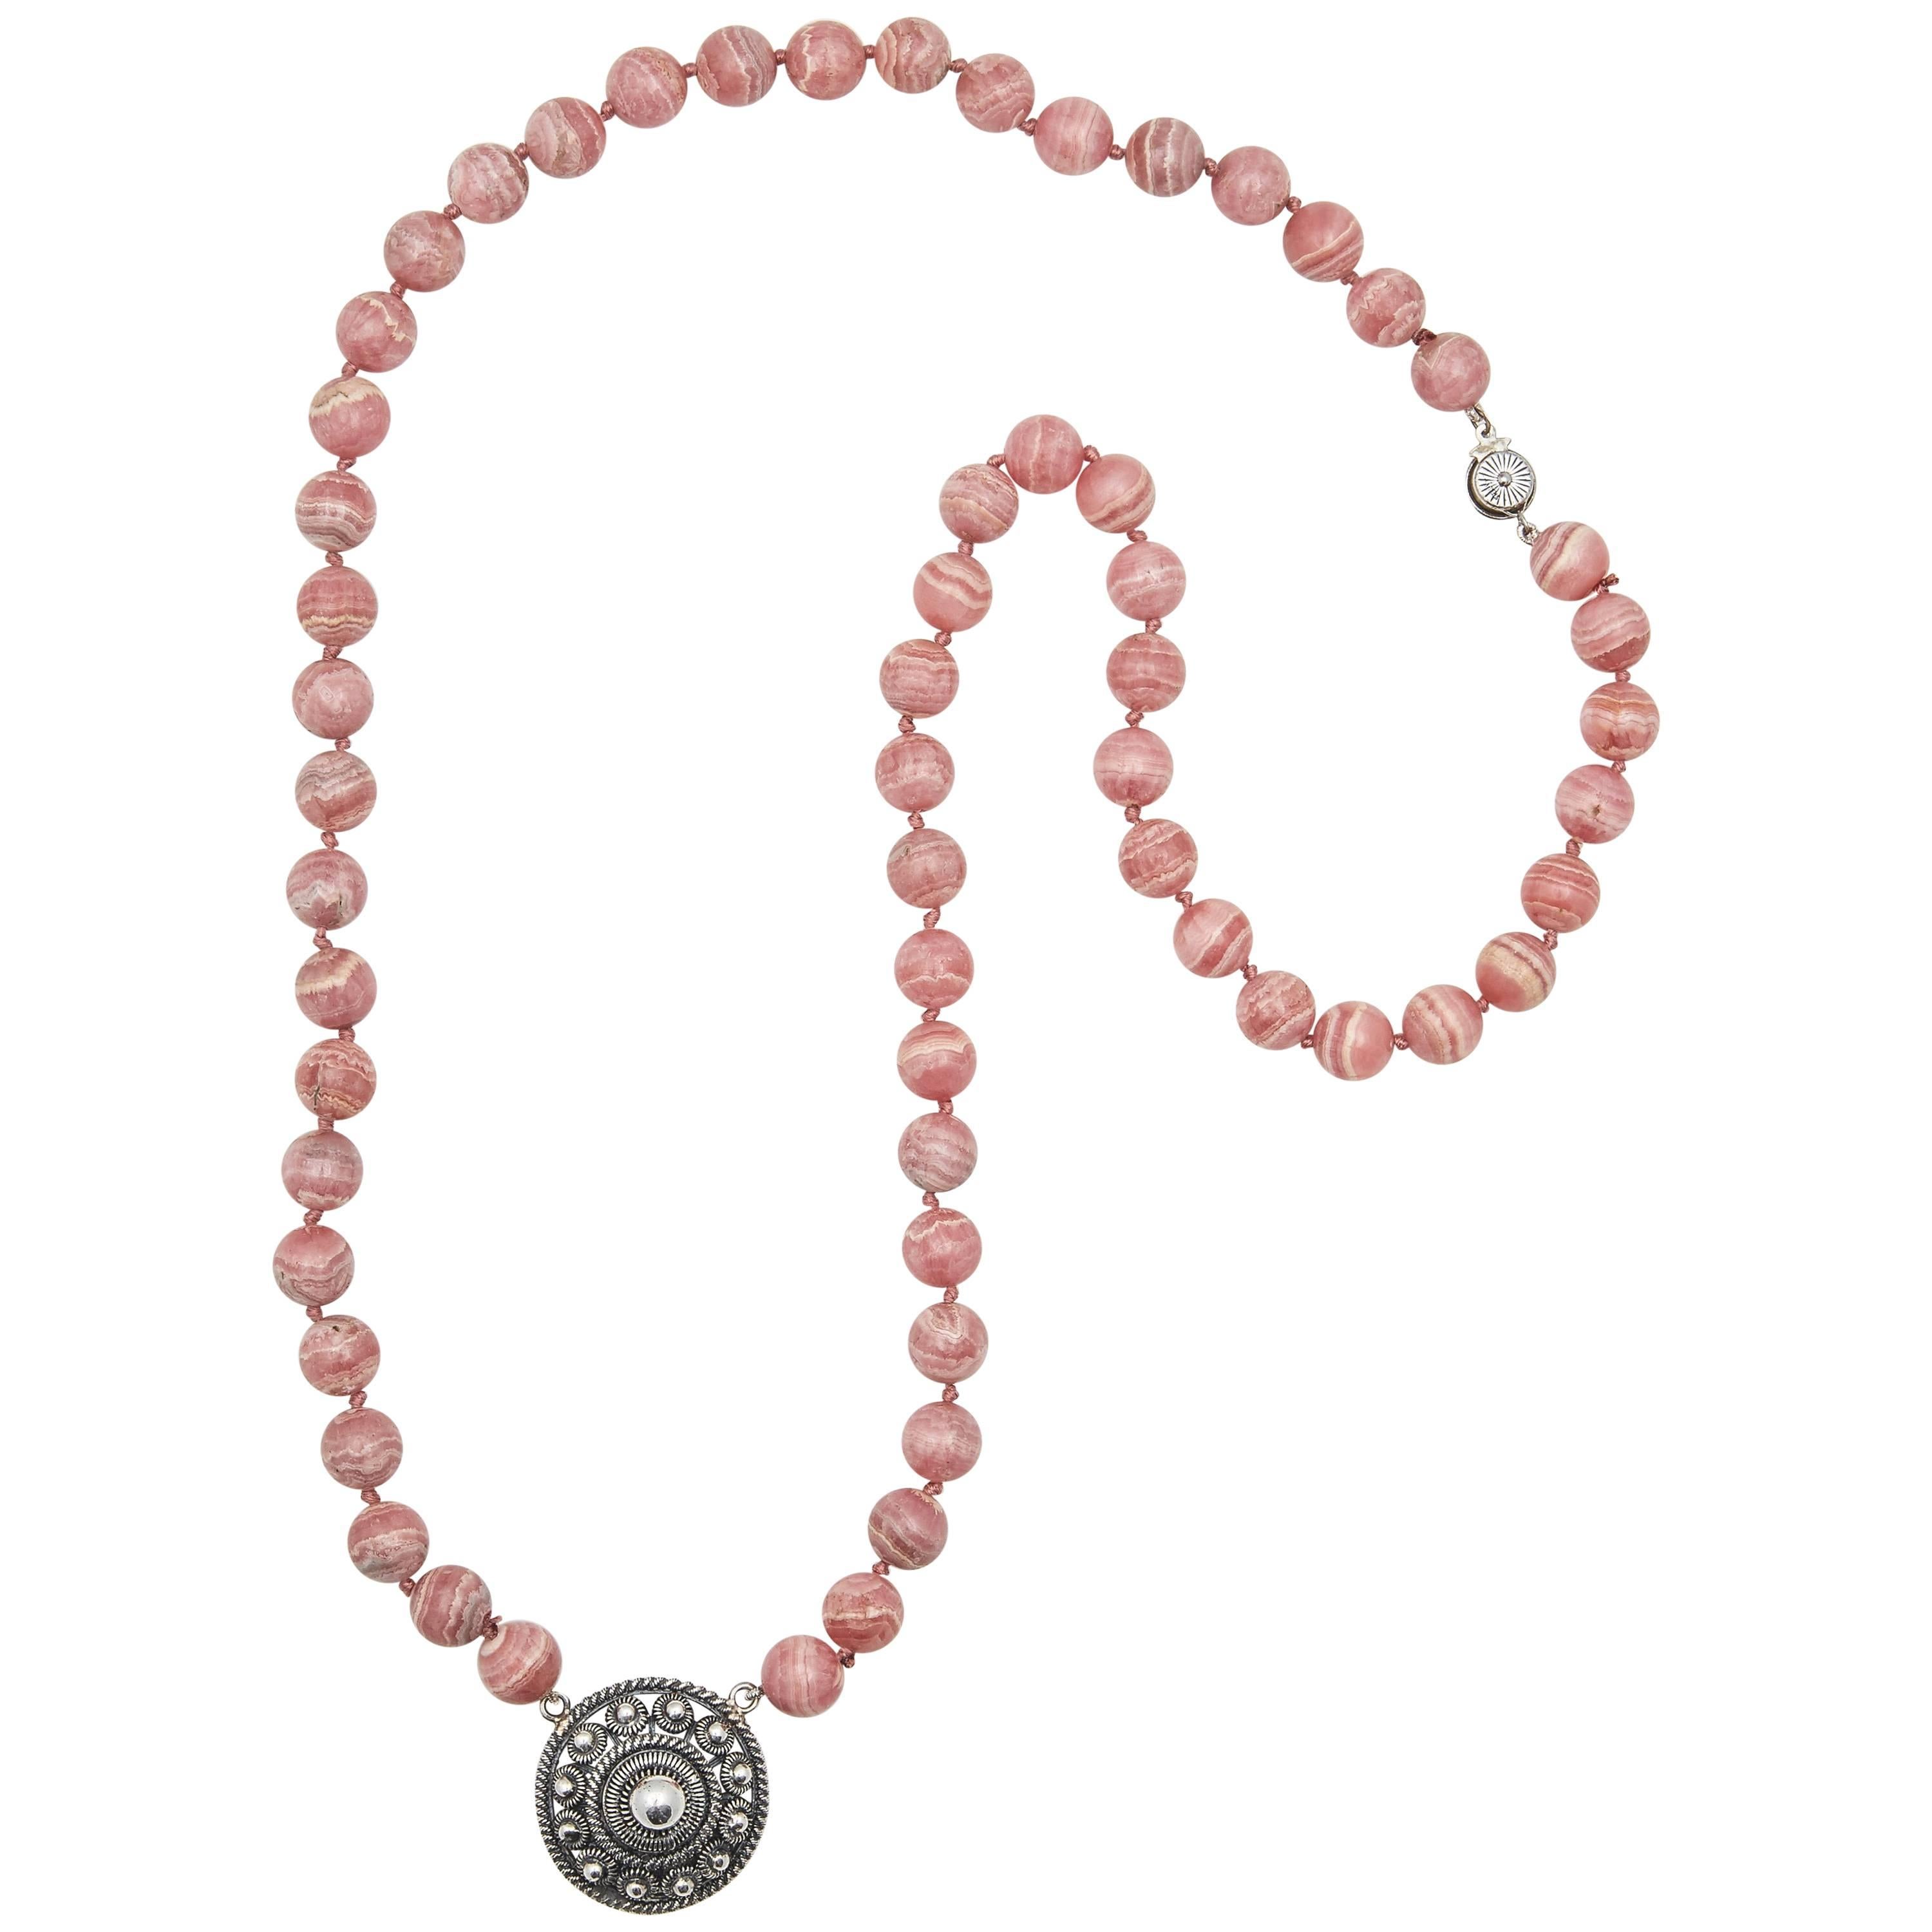 Rhodochrosite Beaded Necklace with Silver Rondelle Pendant, 20th century